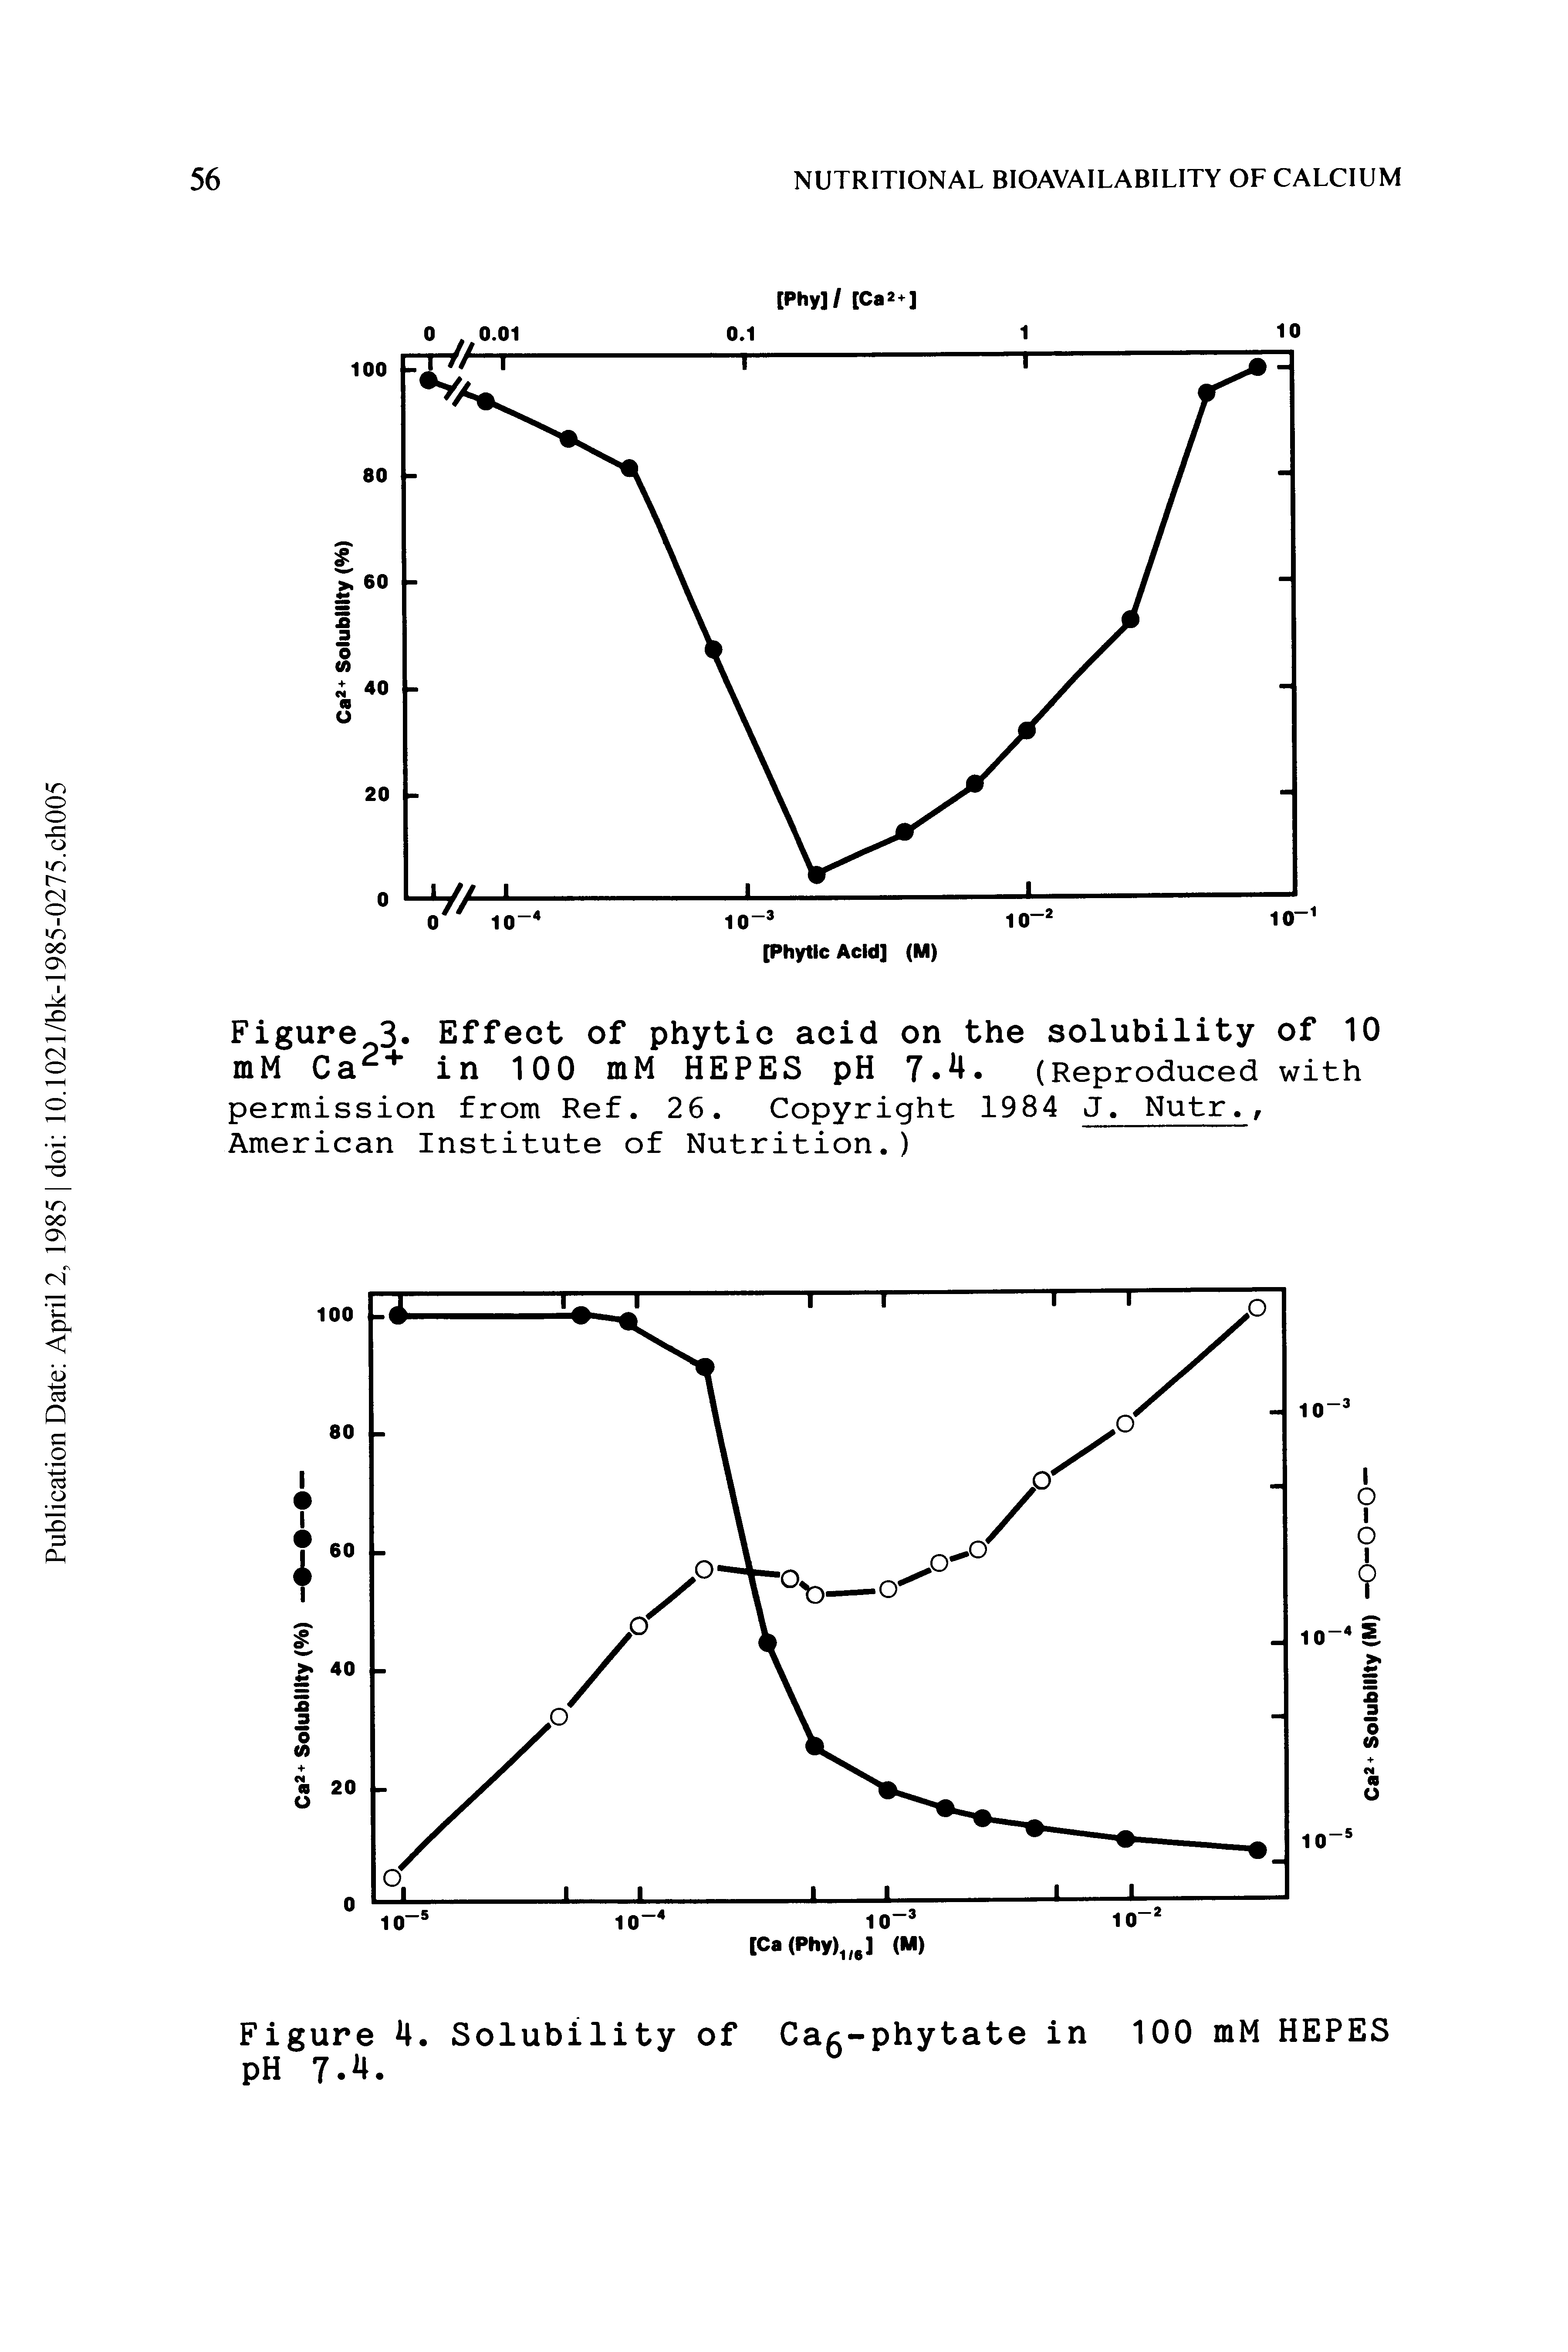 Figure 3- Effect of phytic acid on the solubility of 10 mM Ca + in 100 mM HEPES pH 7 4. (Reproduced with permission from Ref. 26. Copyright 1984 J. Nutr., American Institute of Nutrition.)...